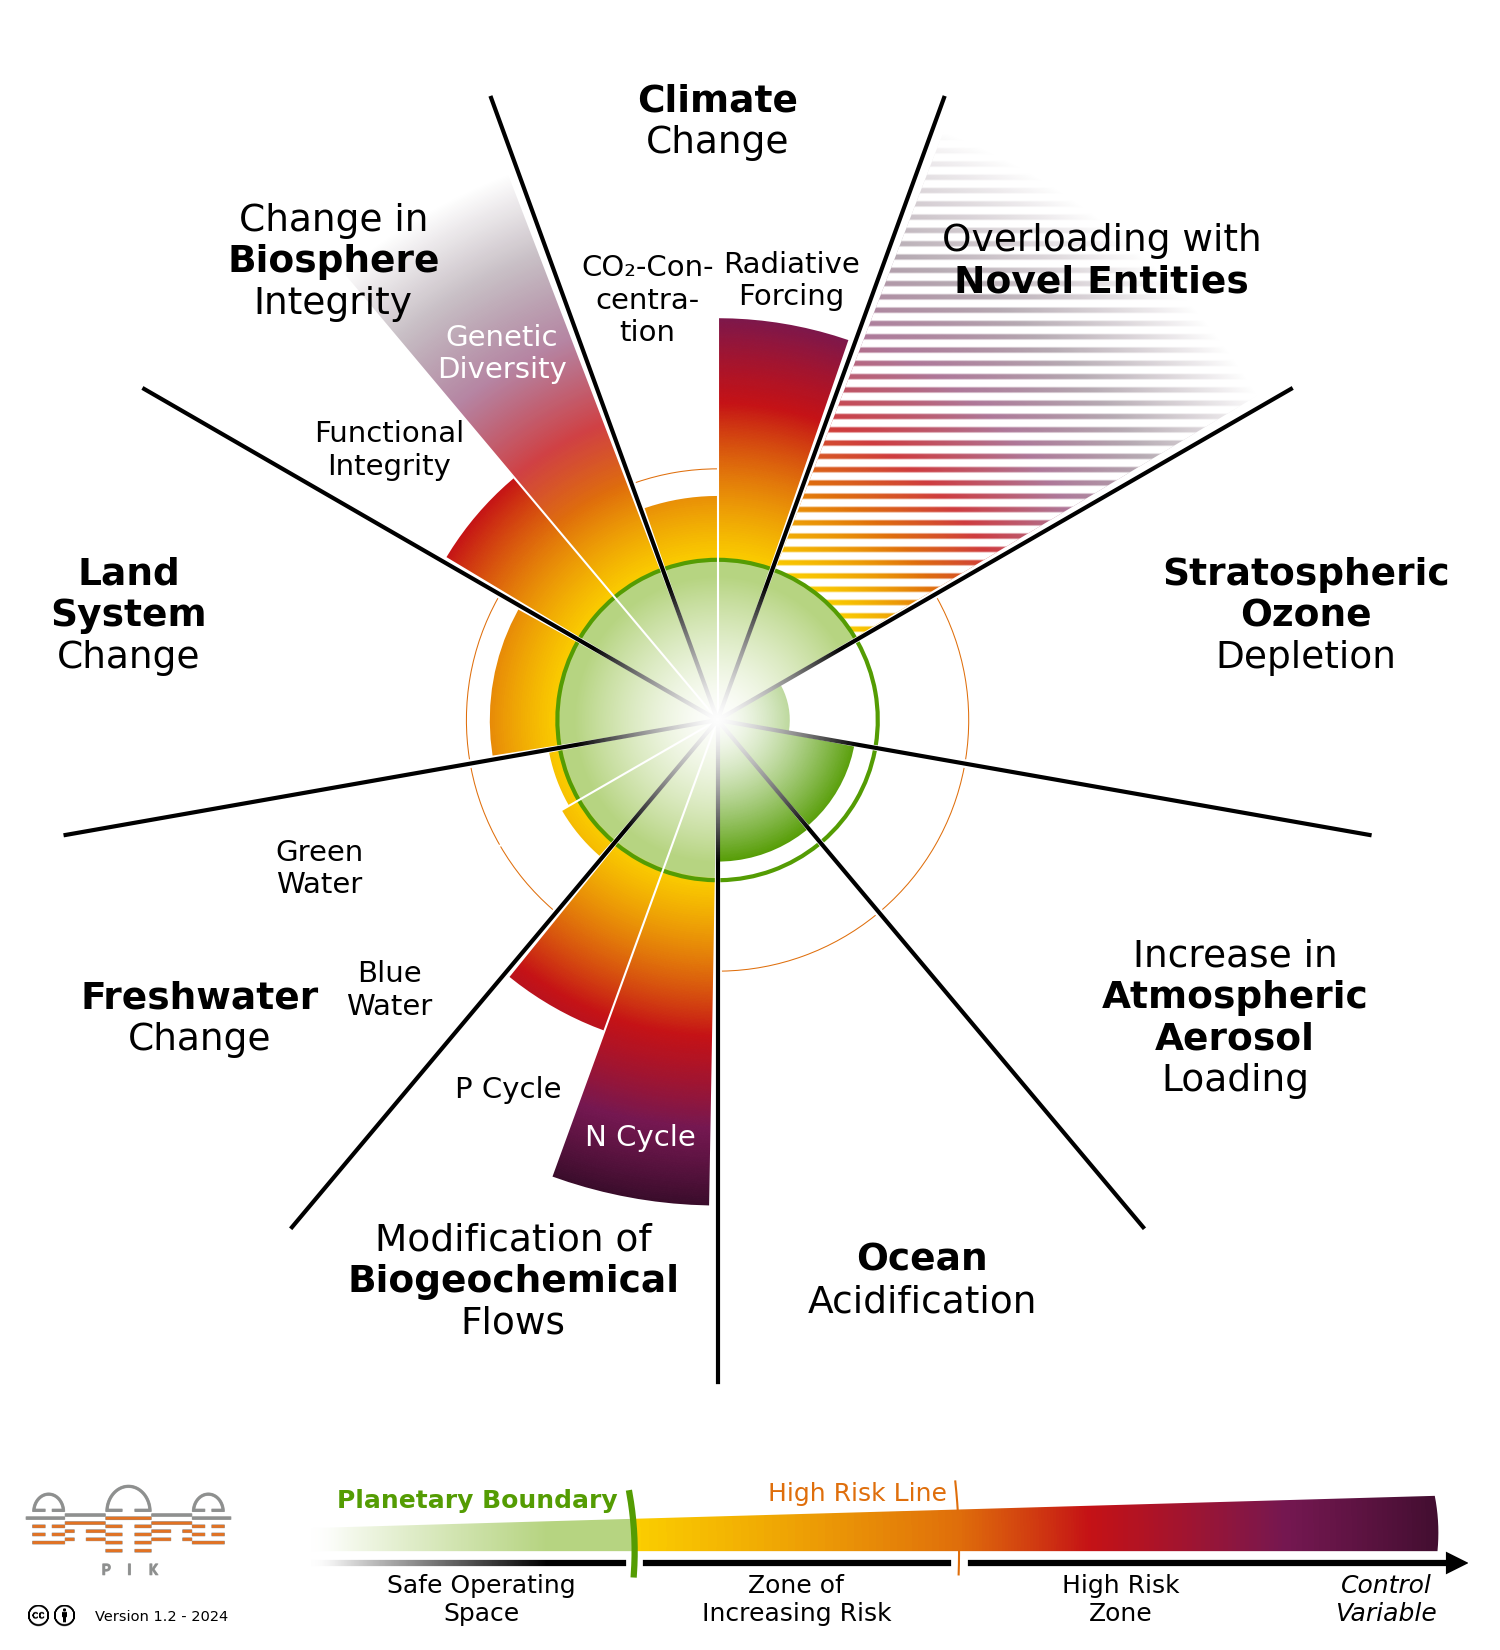 Planetary Boundaries – defining a safe operating space for humanity